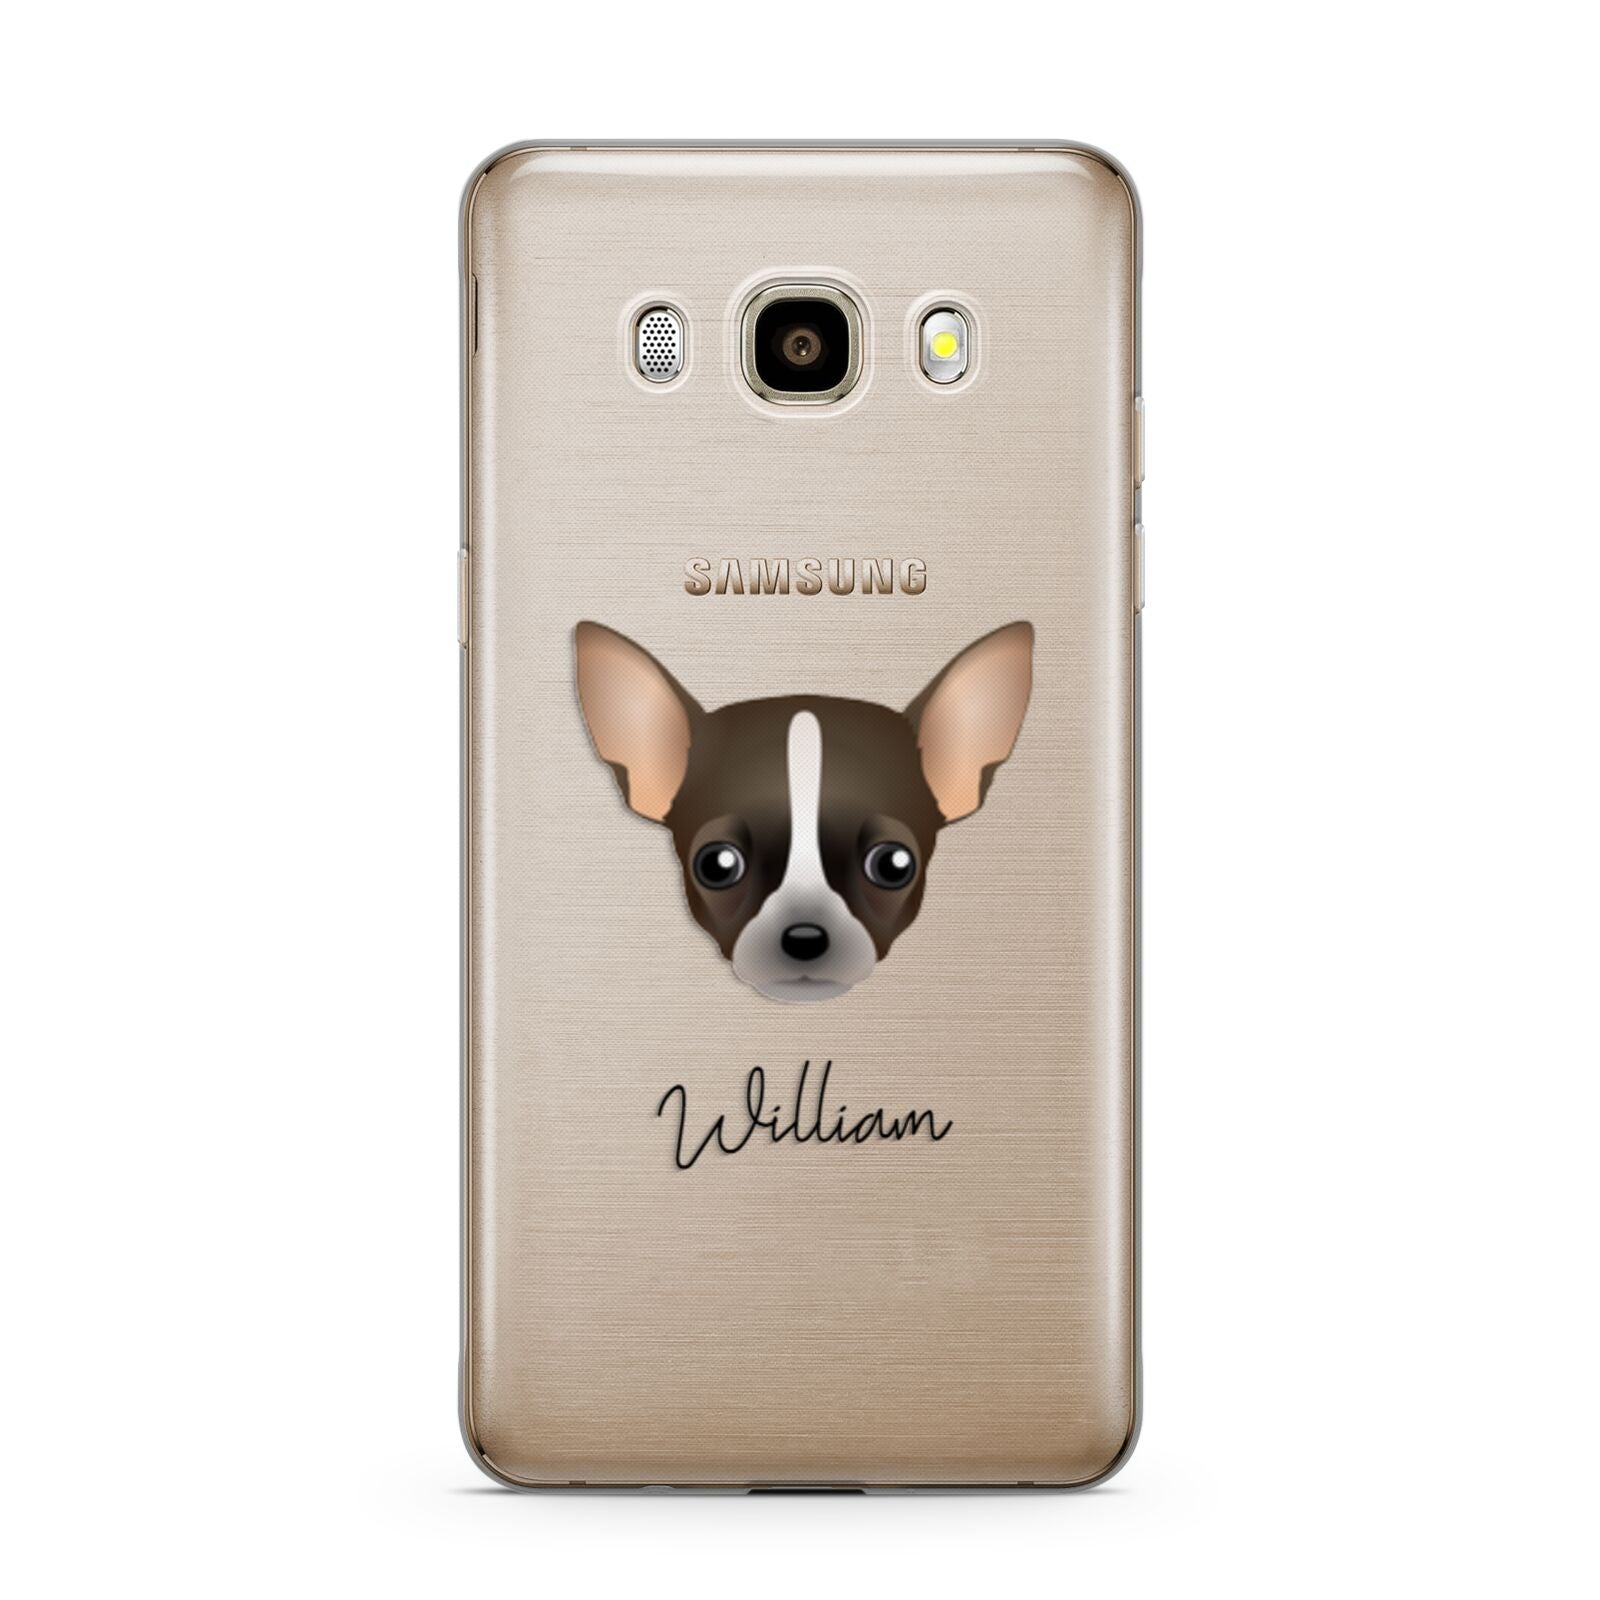 Chihuahua Personalised Samsung Galaxy J7 2016 Case on gold phone